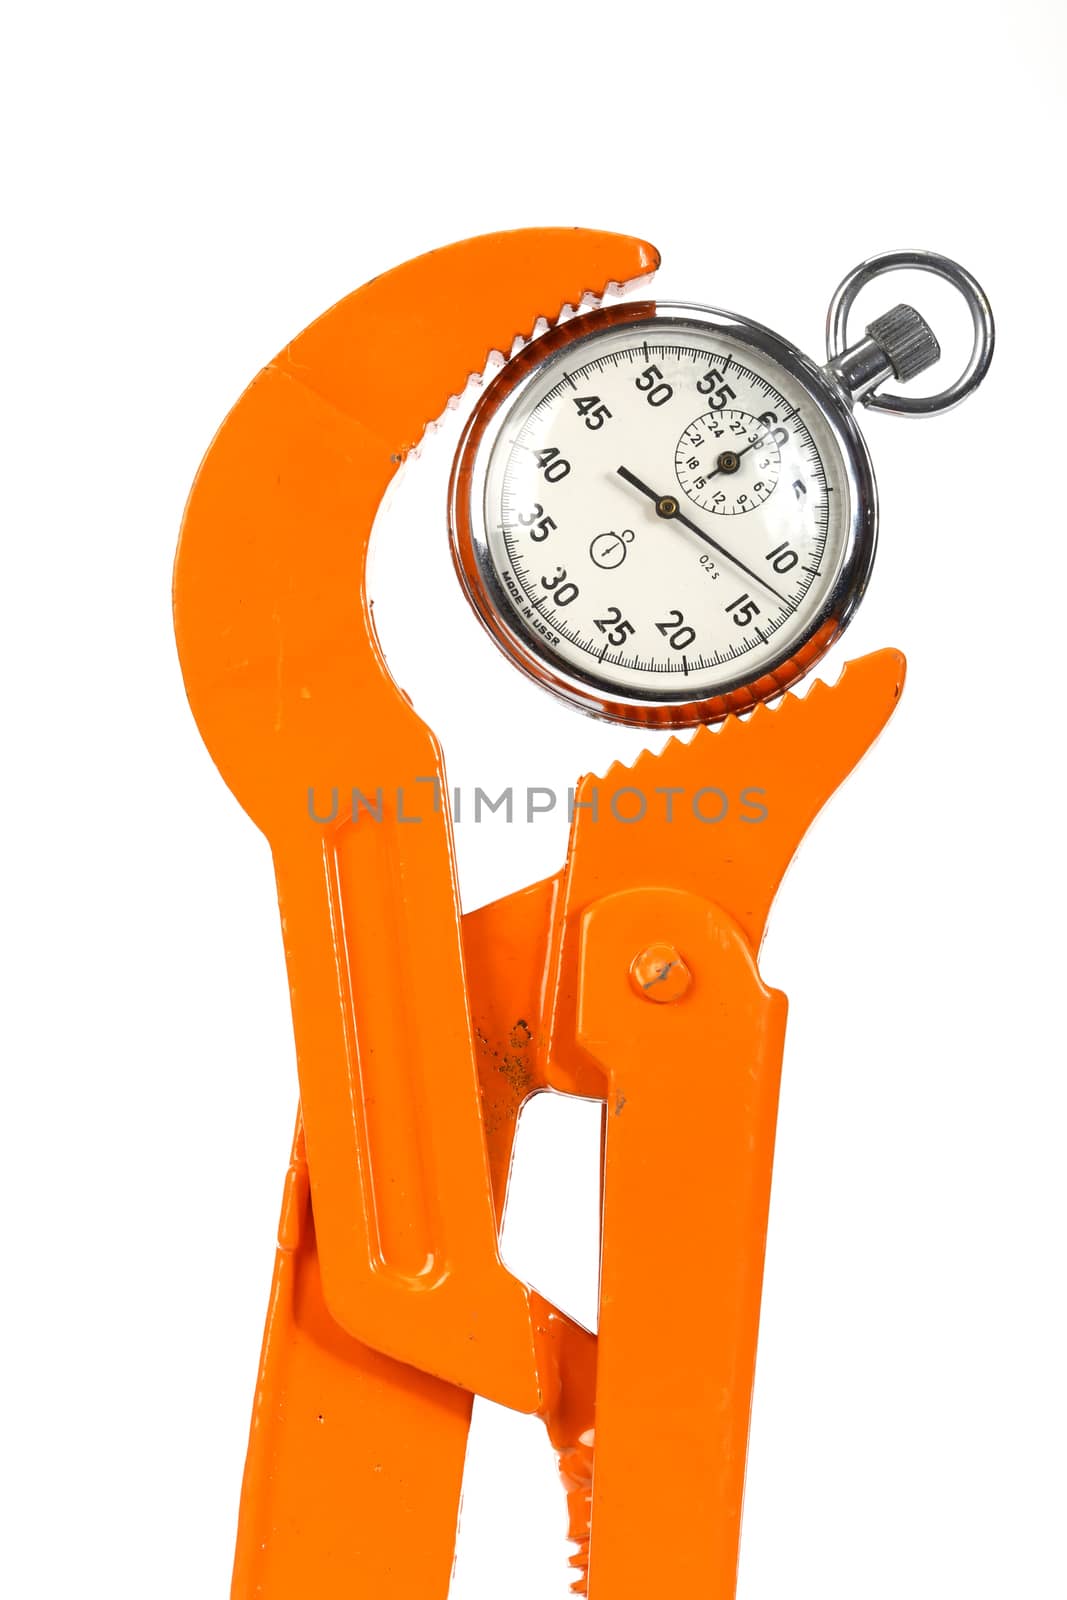 Wrench and stopwatch close up on white